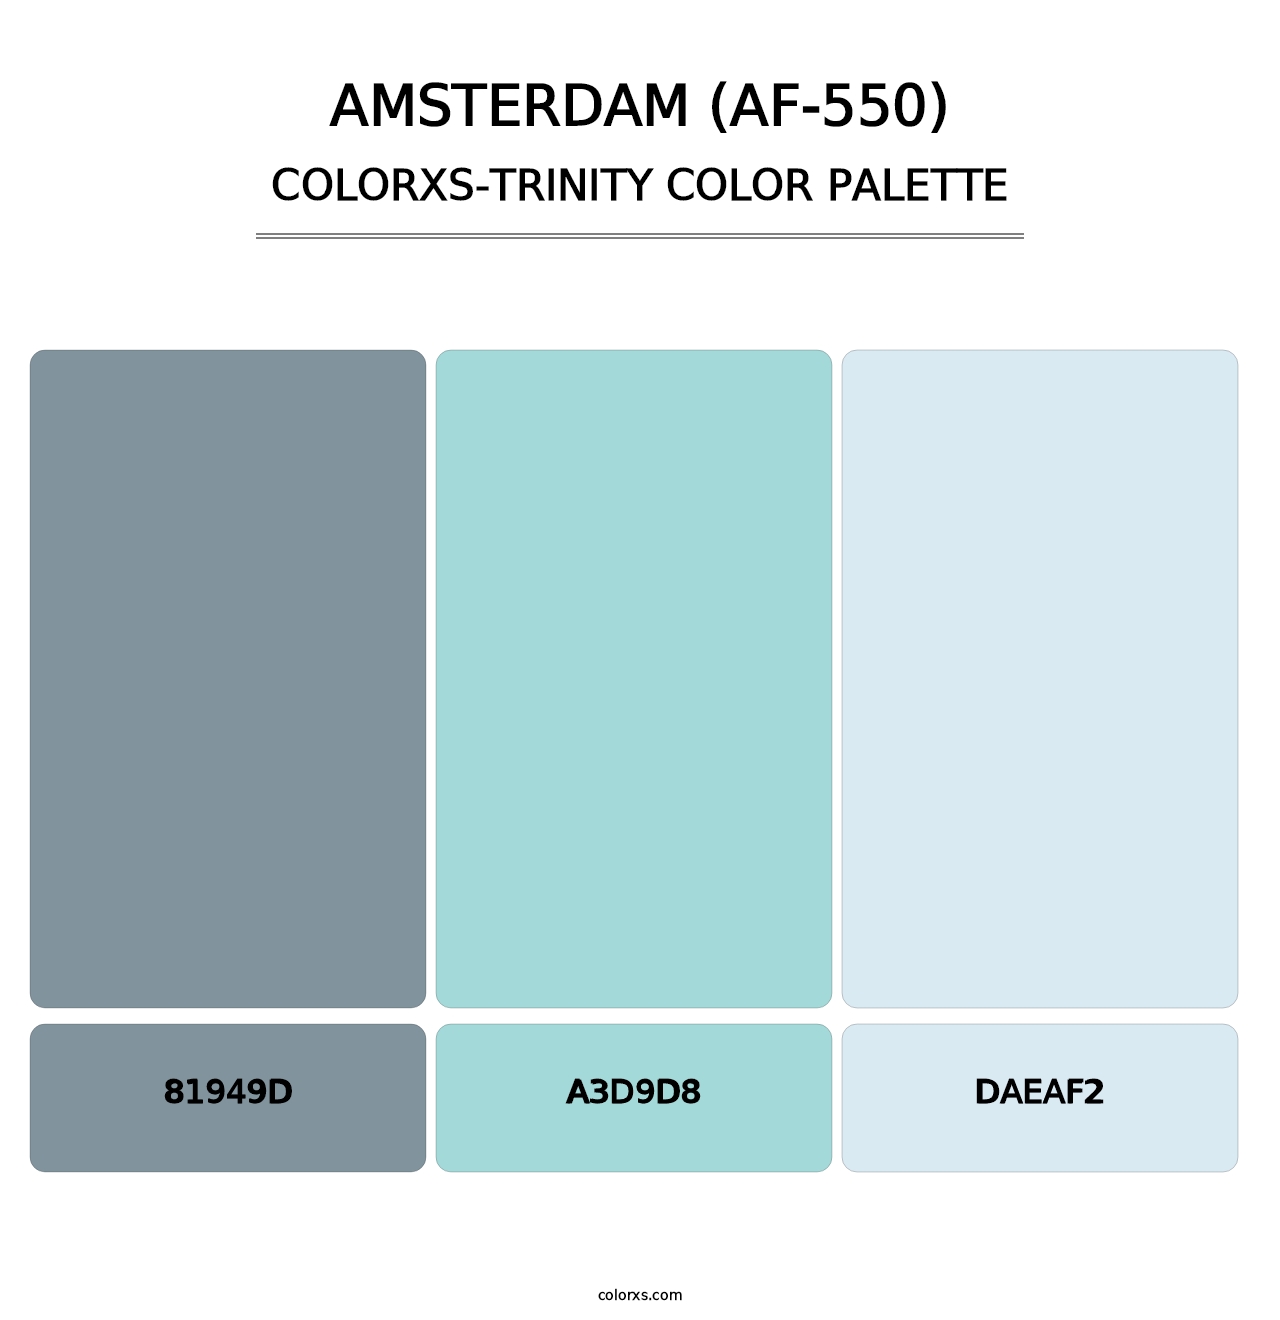 Amsterdam (AF-550) - Colorxs Trinity Palette